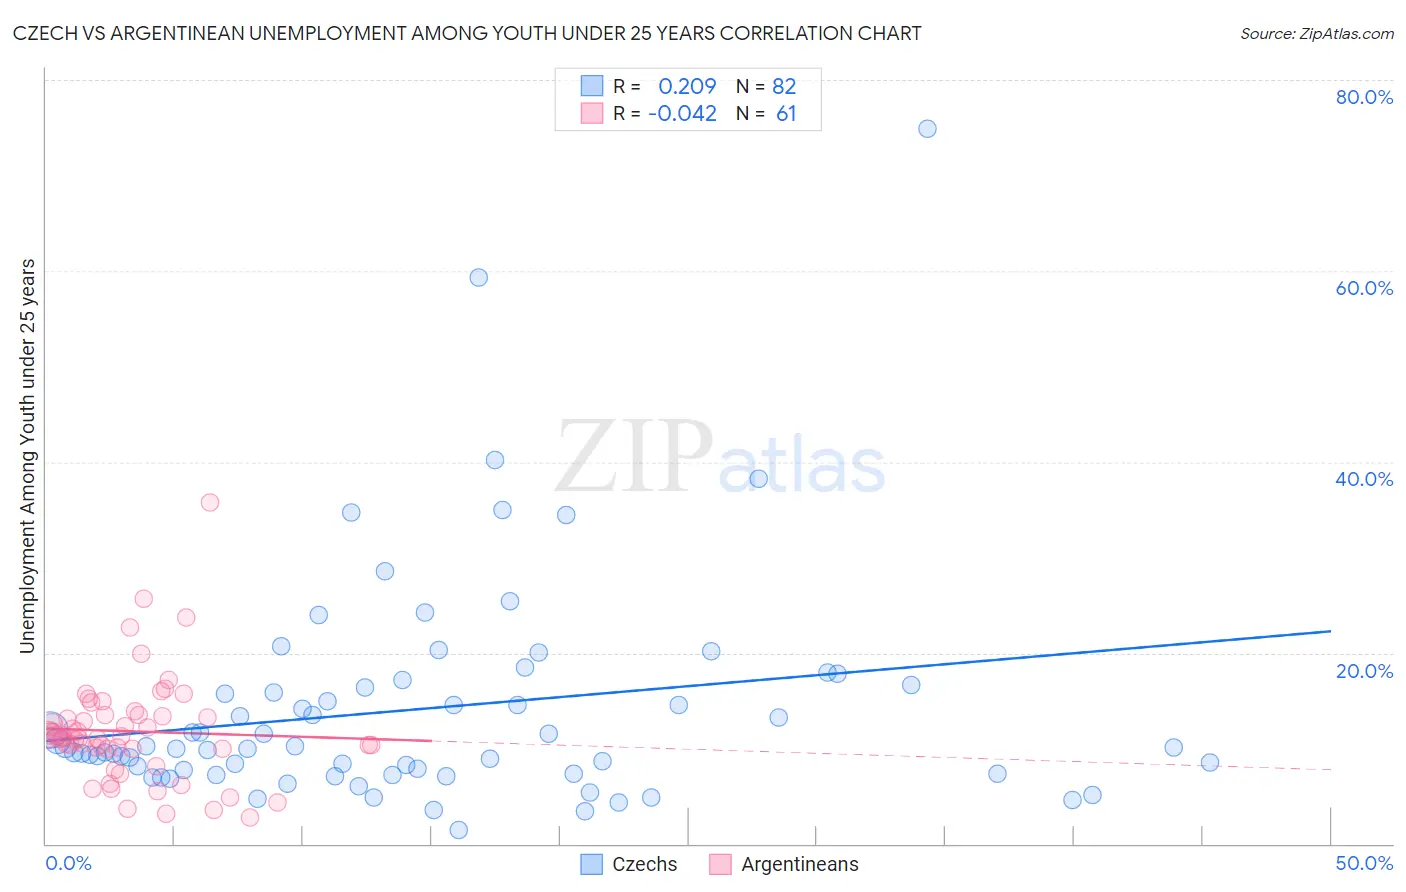 Czech vs Argentinean Unemployment Among Youth under 25 years